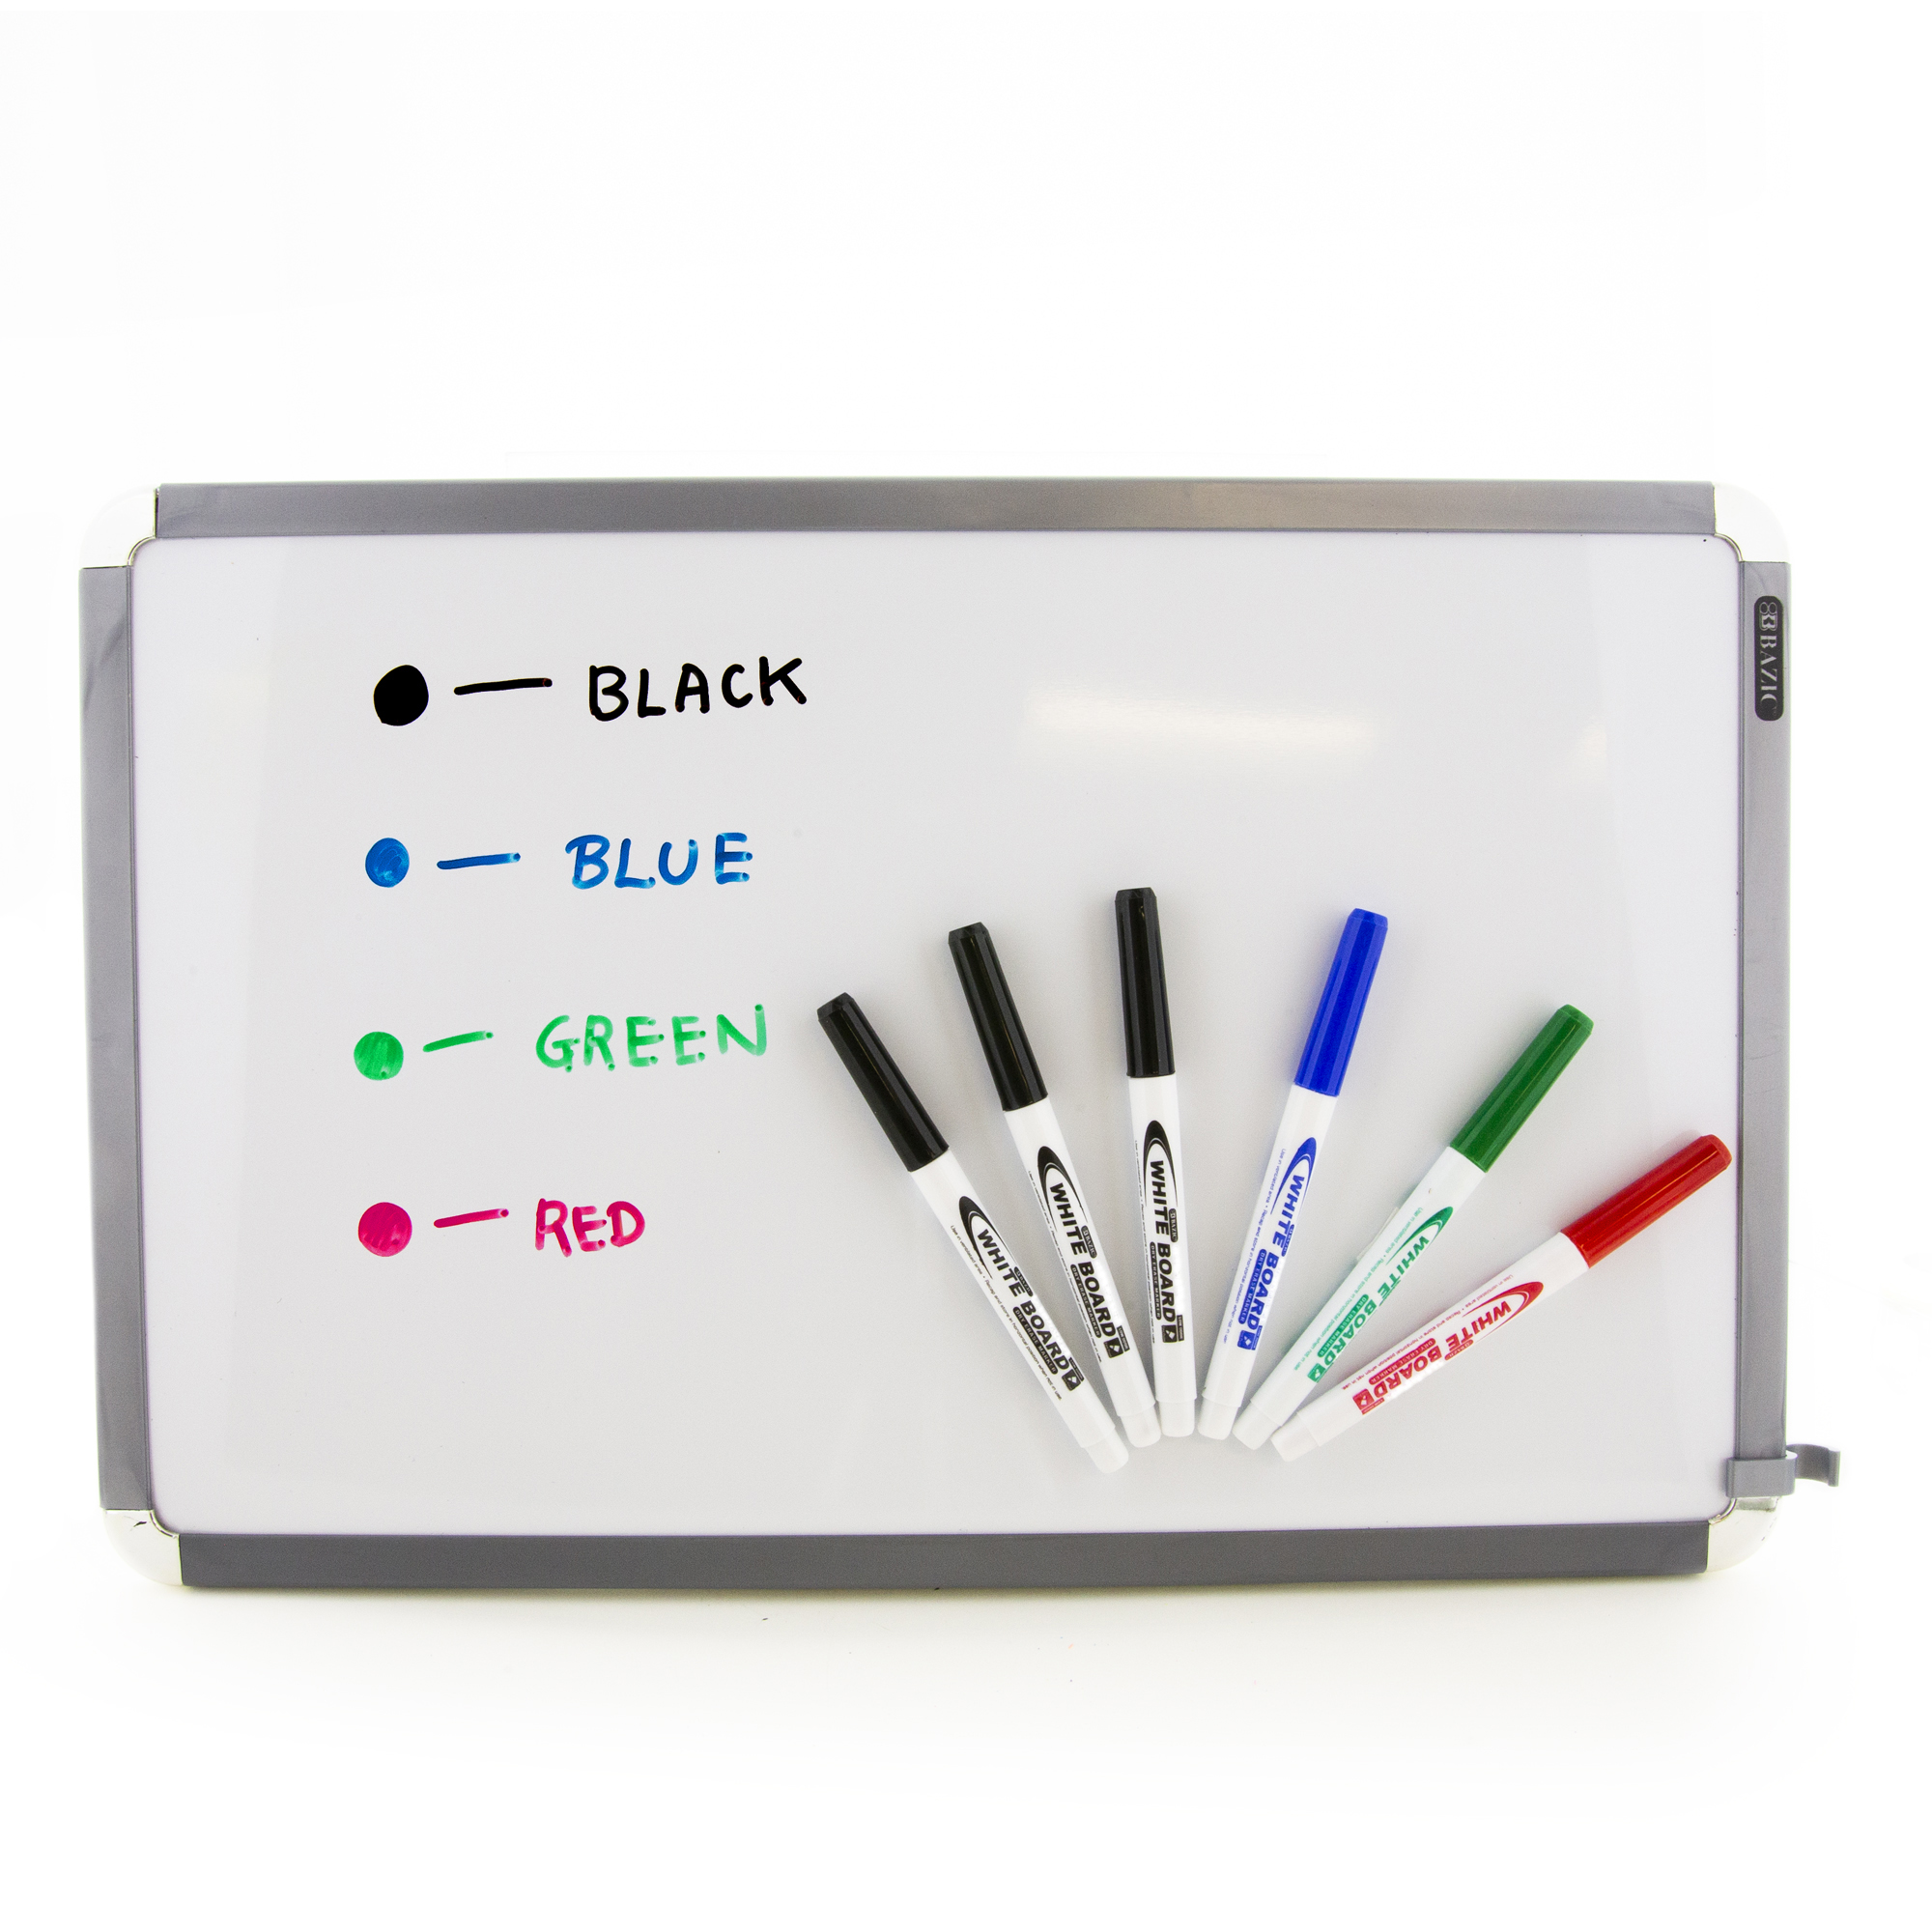 Fine Tip Dry Erase Marker - USA Made - 6 Pack - Item #260069 -   Custom Printed Promotional Products